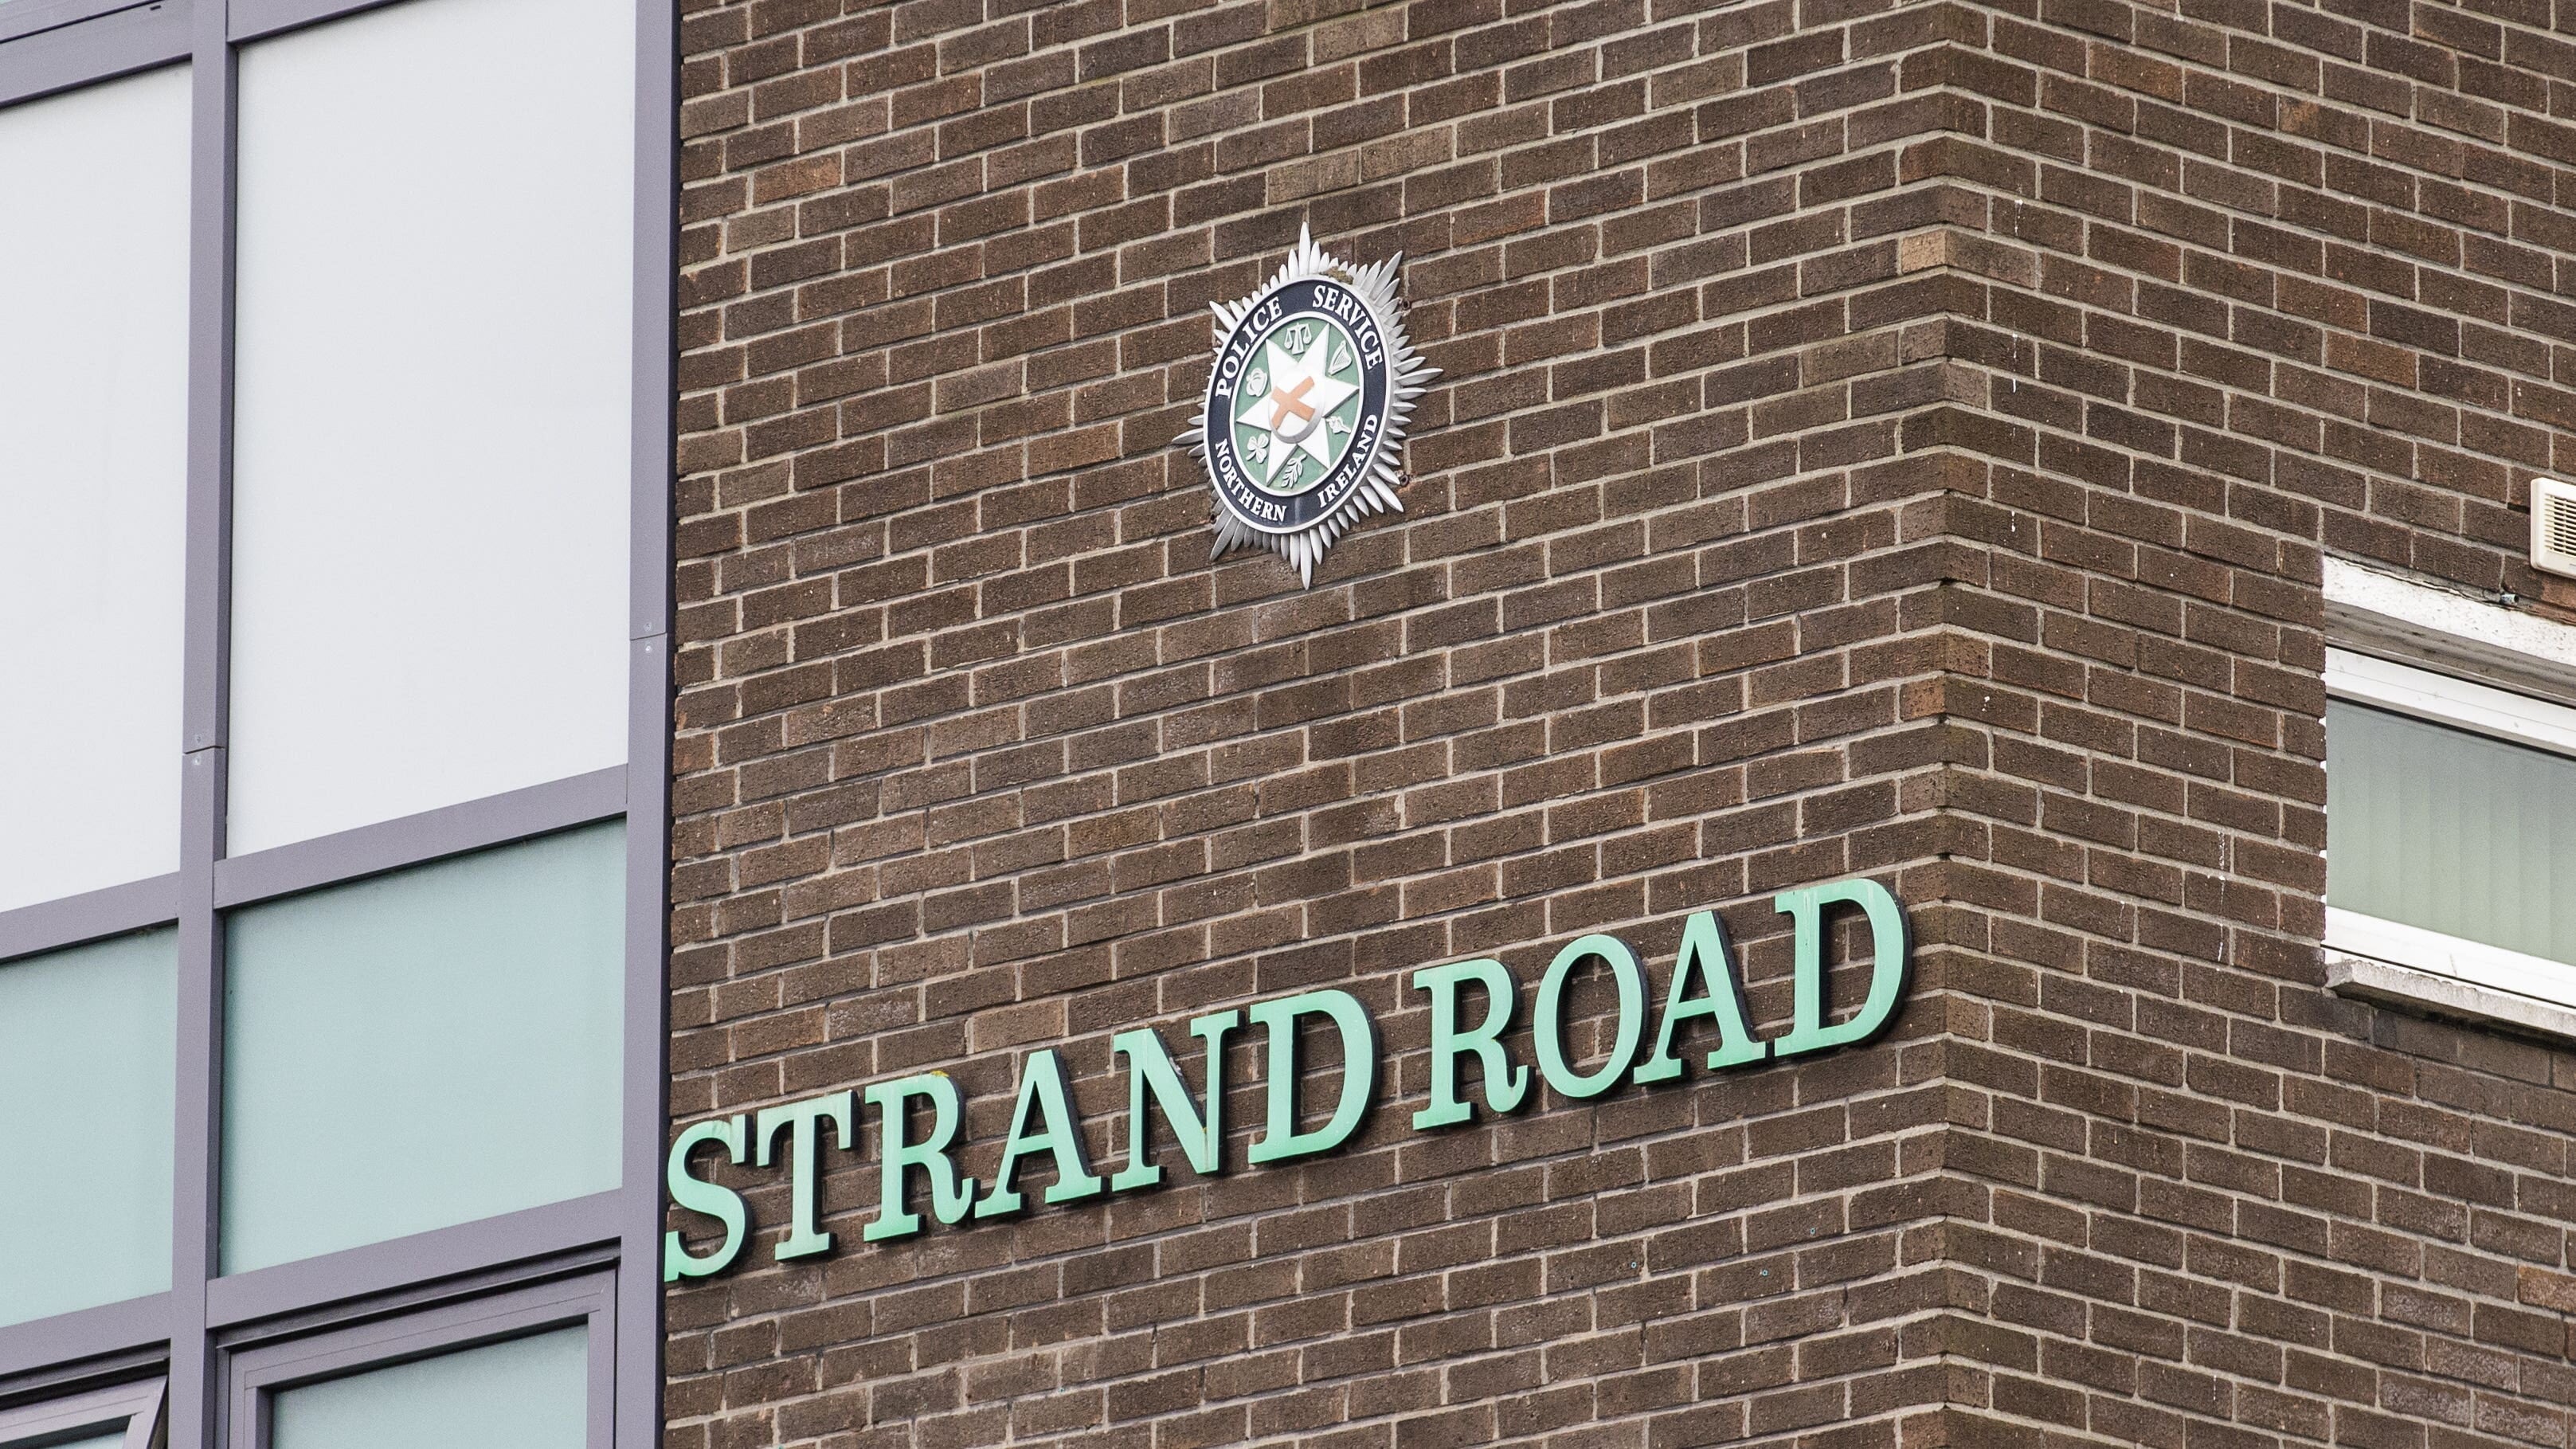 Strand Road Police Service of Northern Ireland (PSNI) station in Derry City in Northern Ireland (Liam McBurney/PA)